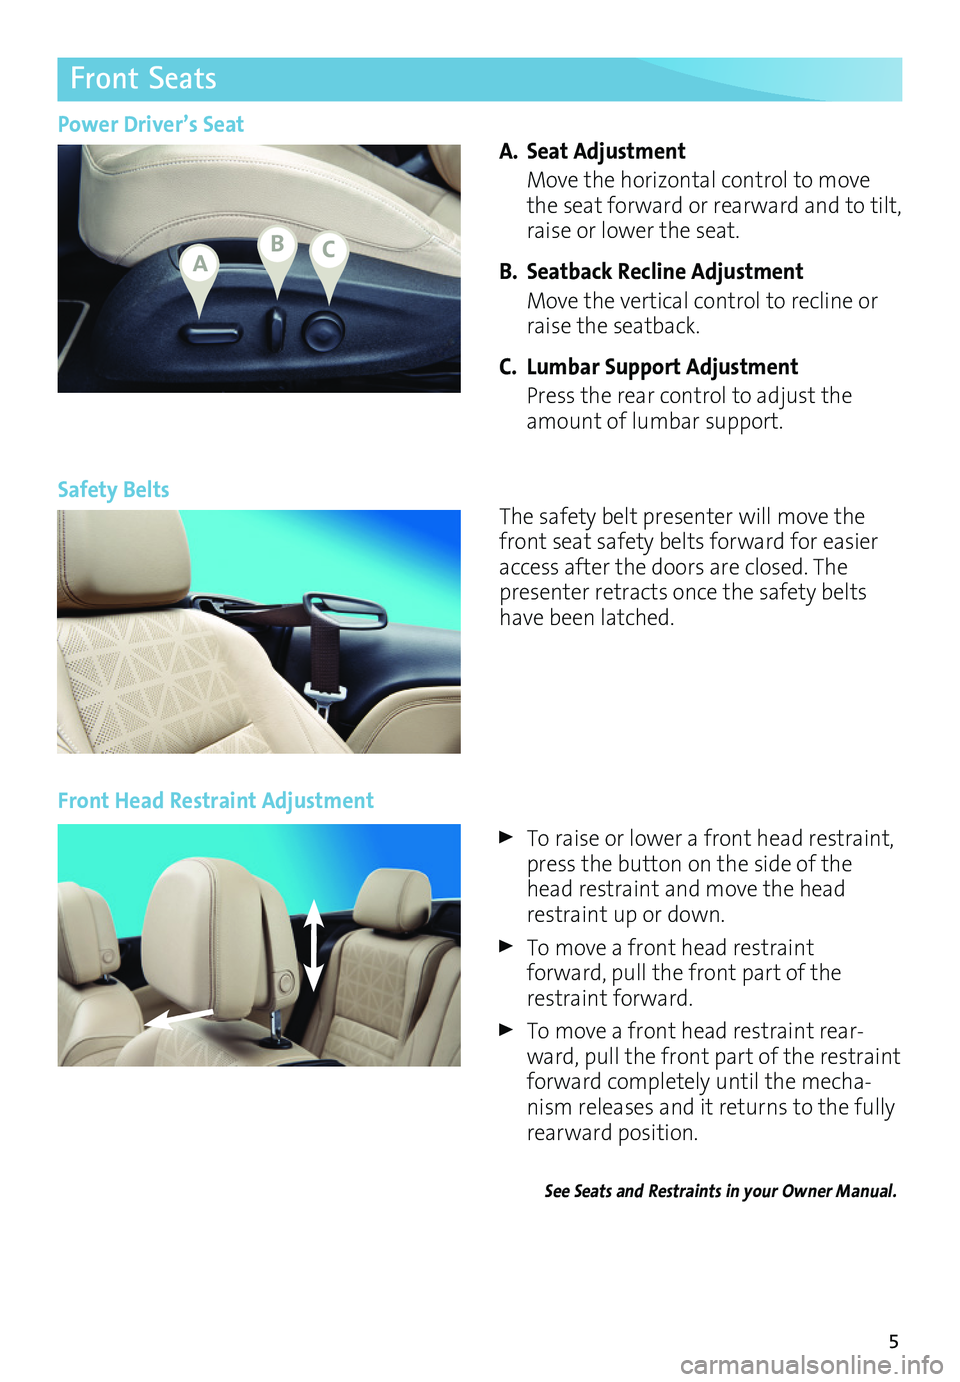 BUICK CASCADA 2017  Get To Know Guide 5
Front Seats
A. Seat Adjustment 
 Move the horizontal control to move the seat forward or rearward and to tilt, raise or lower the seat. 
B. Seatback Recline Adjustment
 Move the vertical control to 